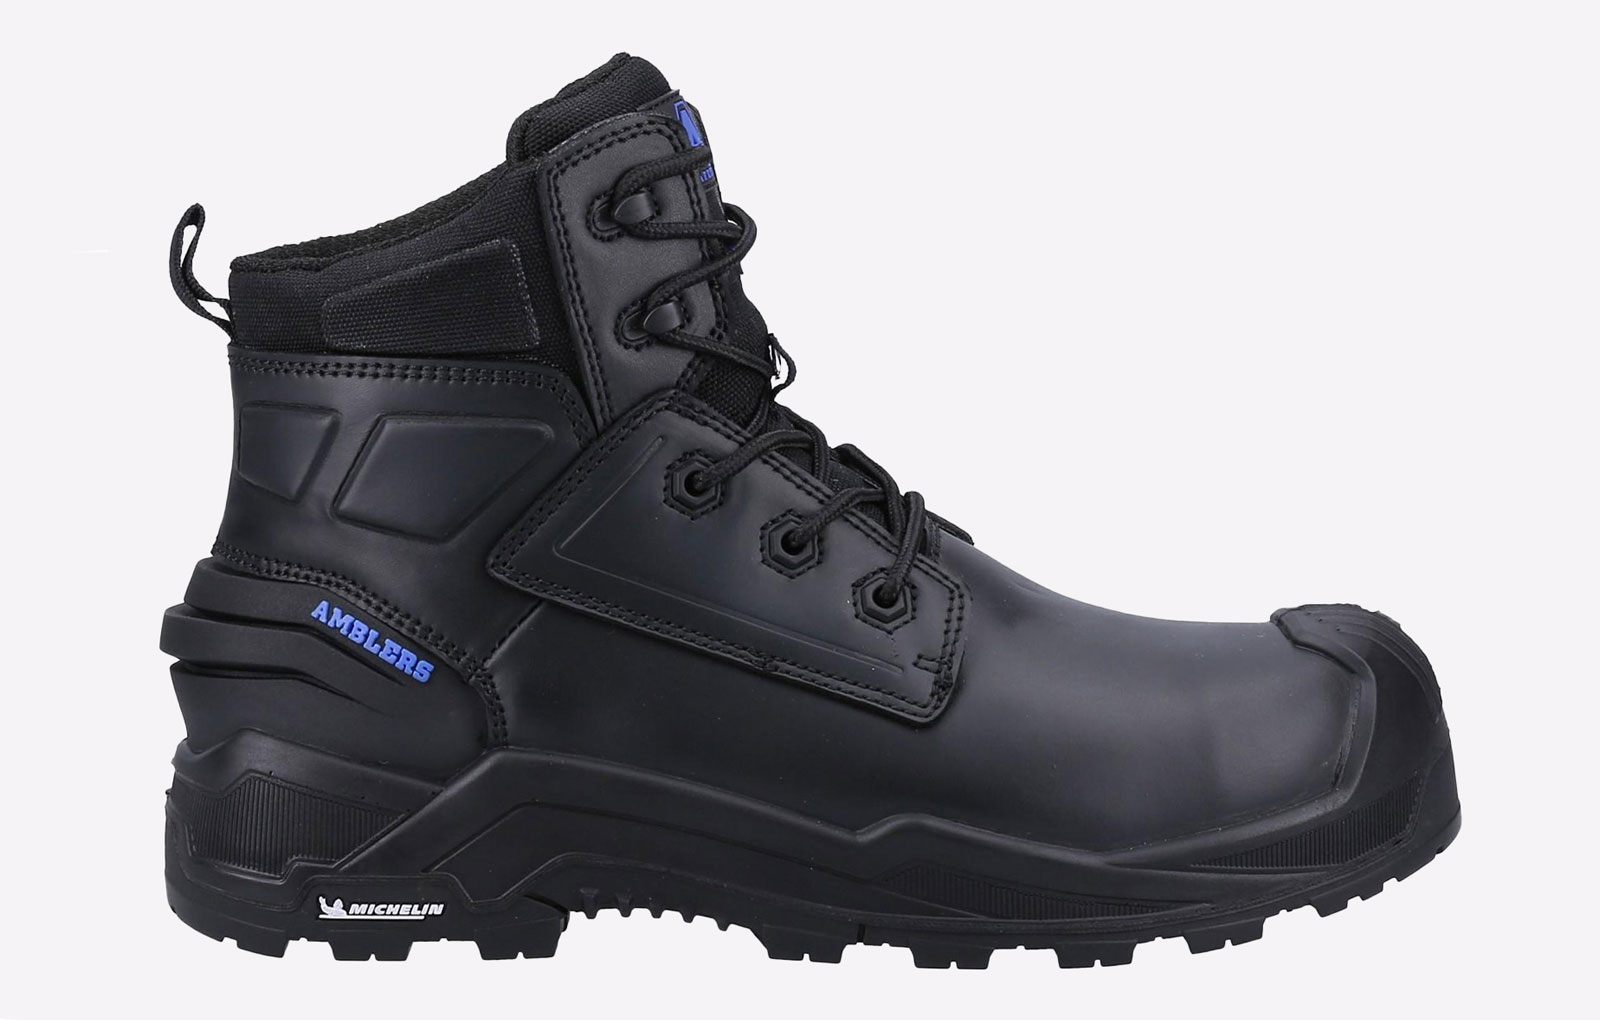 Amblers 980C WATERPROOF Safety Boots Mens - GRD-37409-69762-14